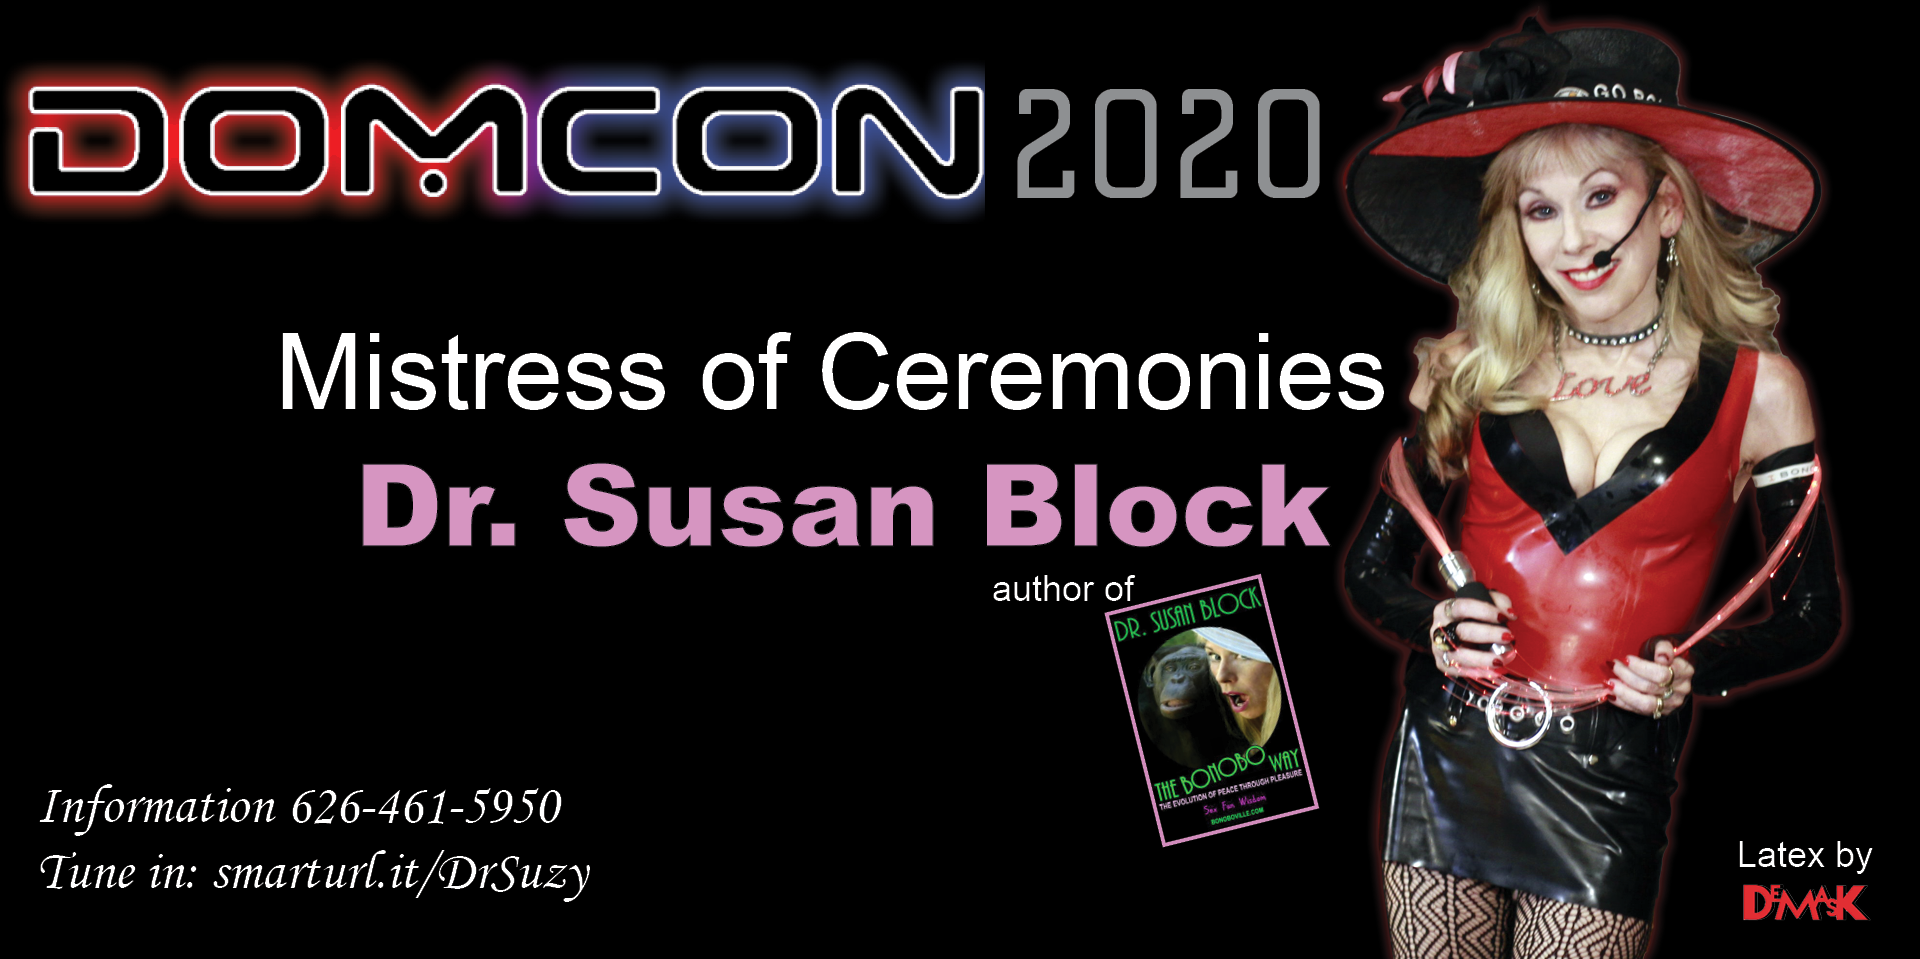 Dr. Susan Block to be Mistress of Ceremonies for DOMCON 2020 Virtual